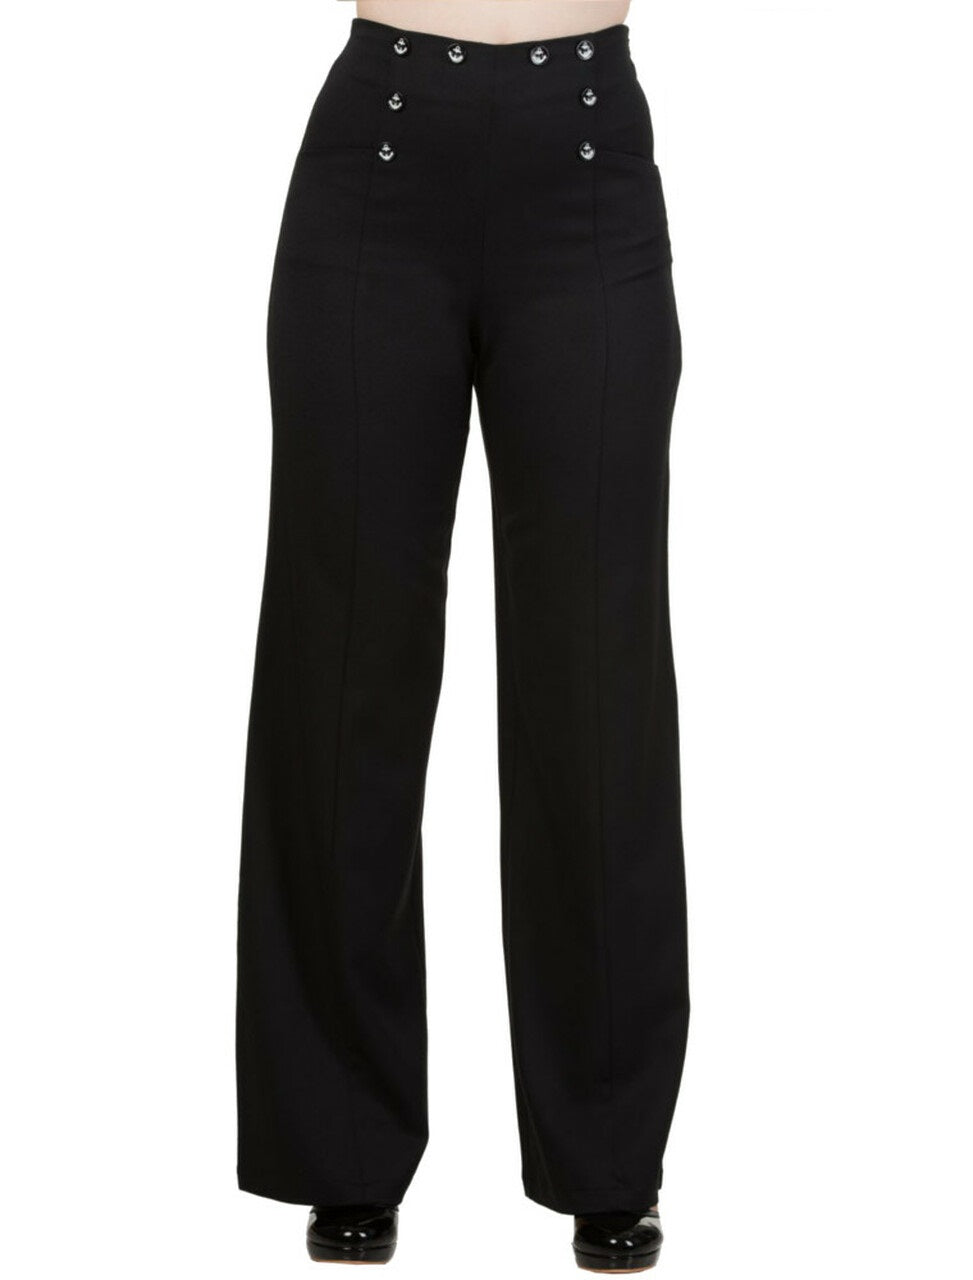 Banned Stay Awhile Black Trouser